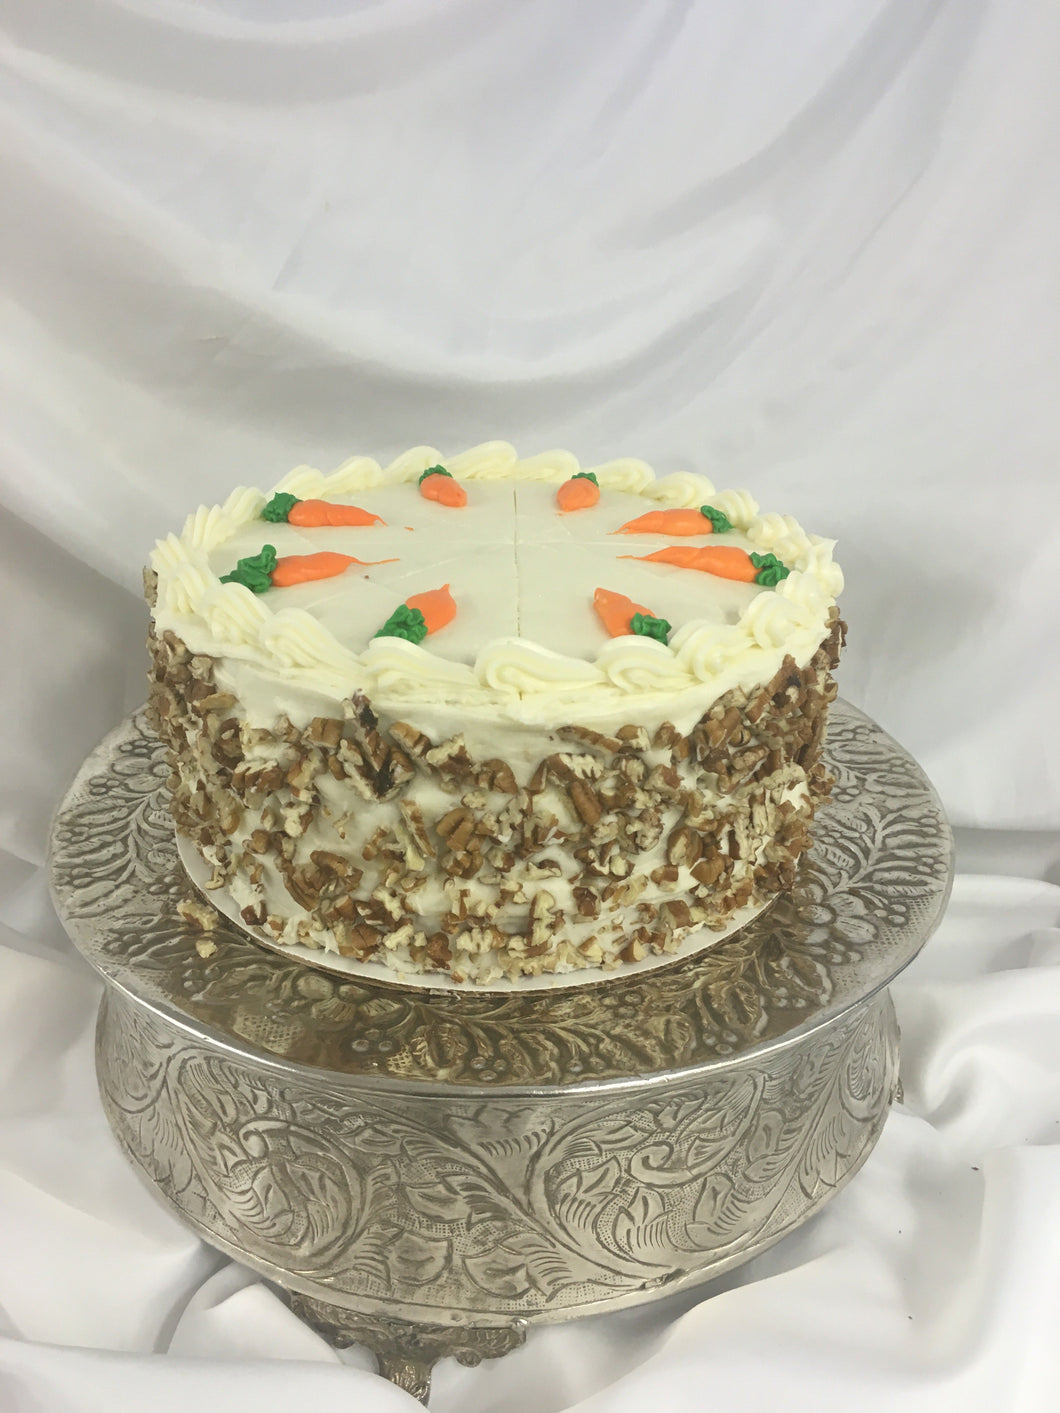 Carrot Cake with nuts